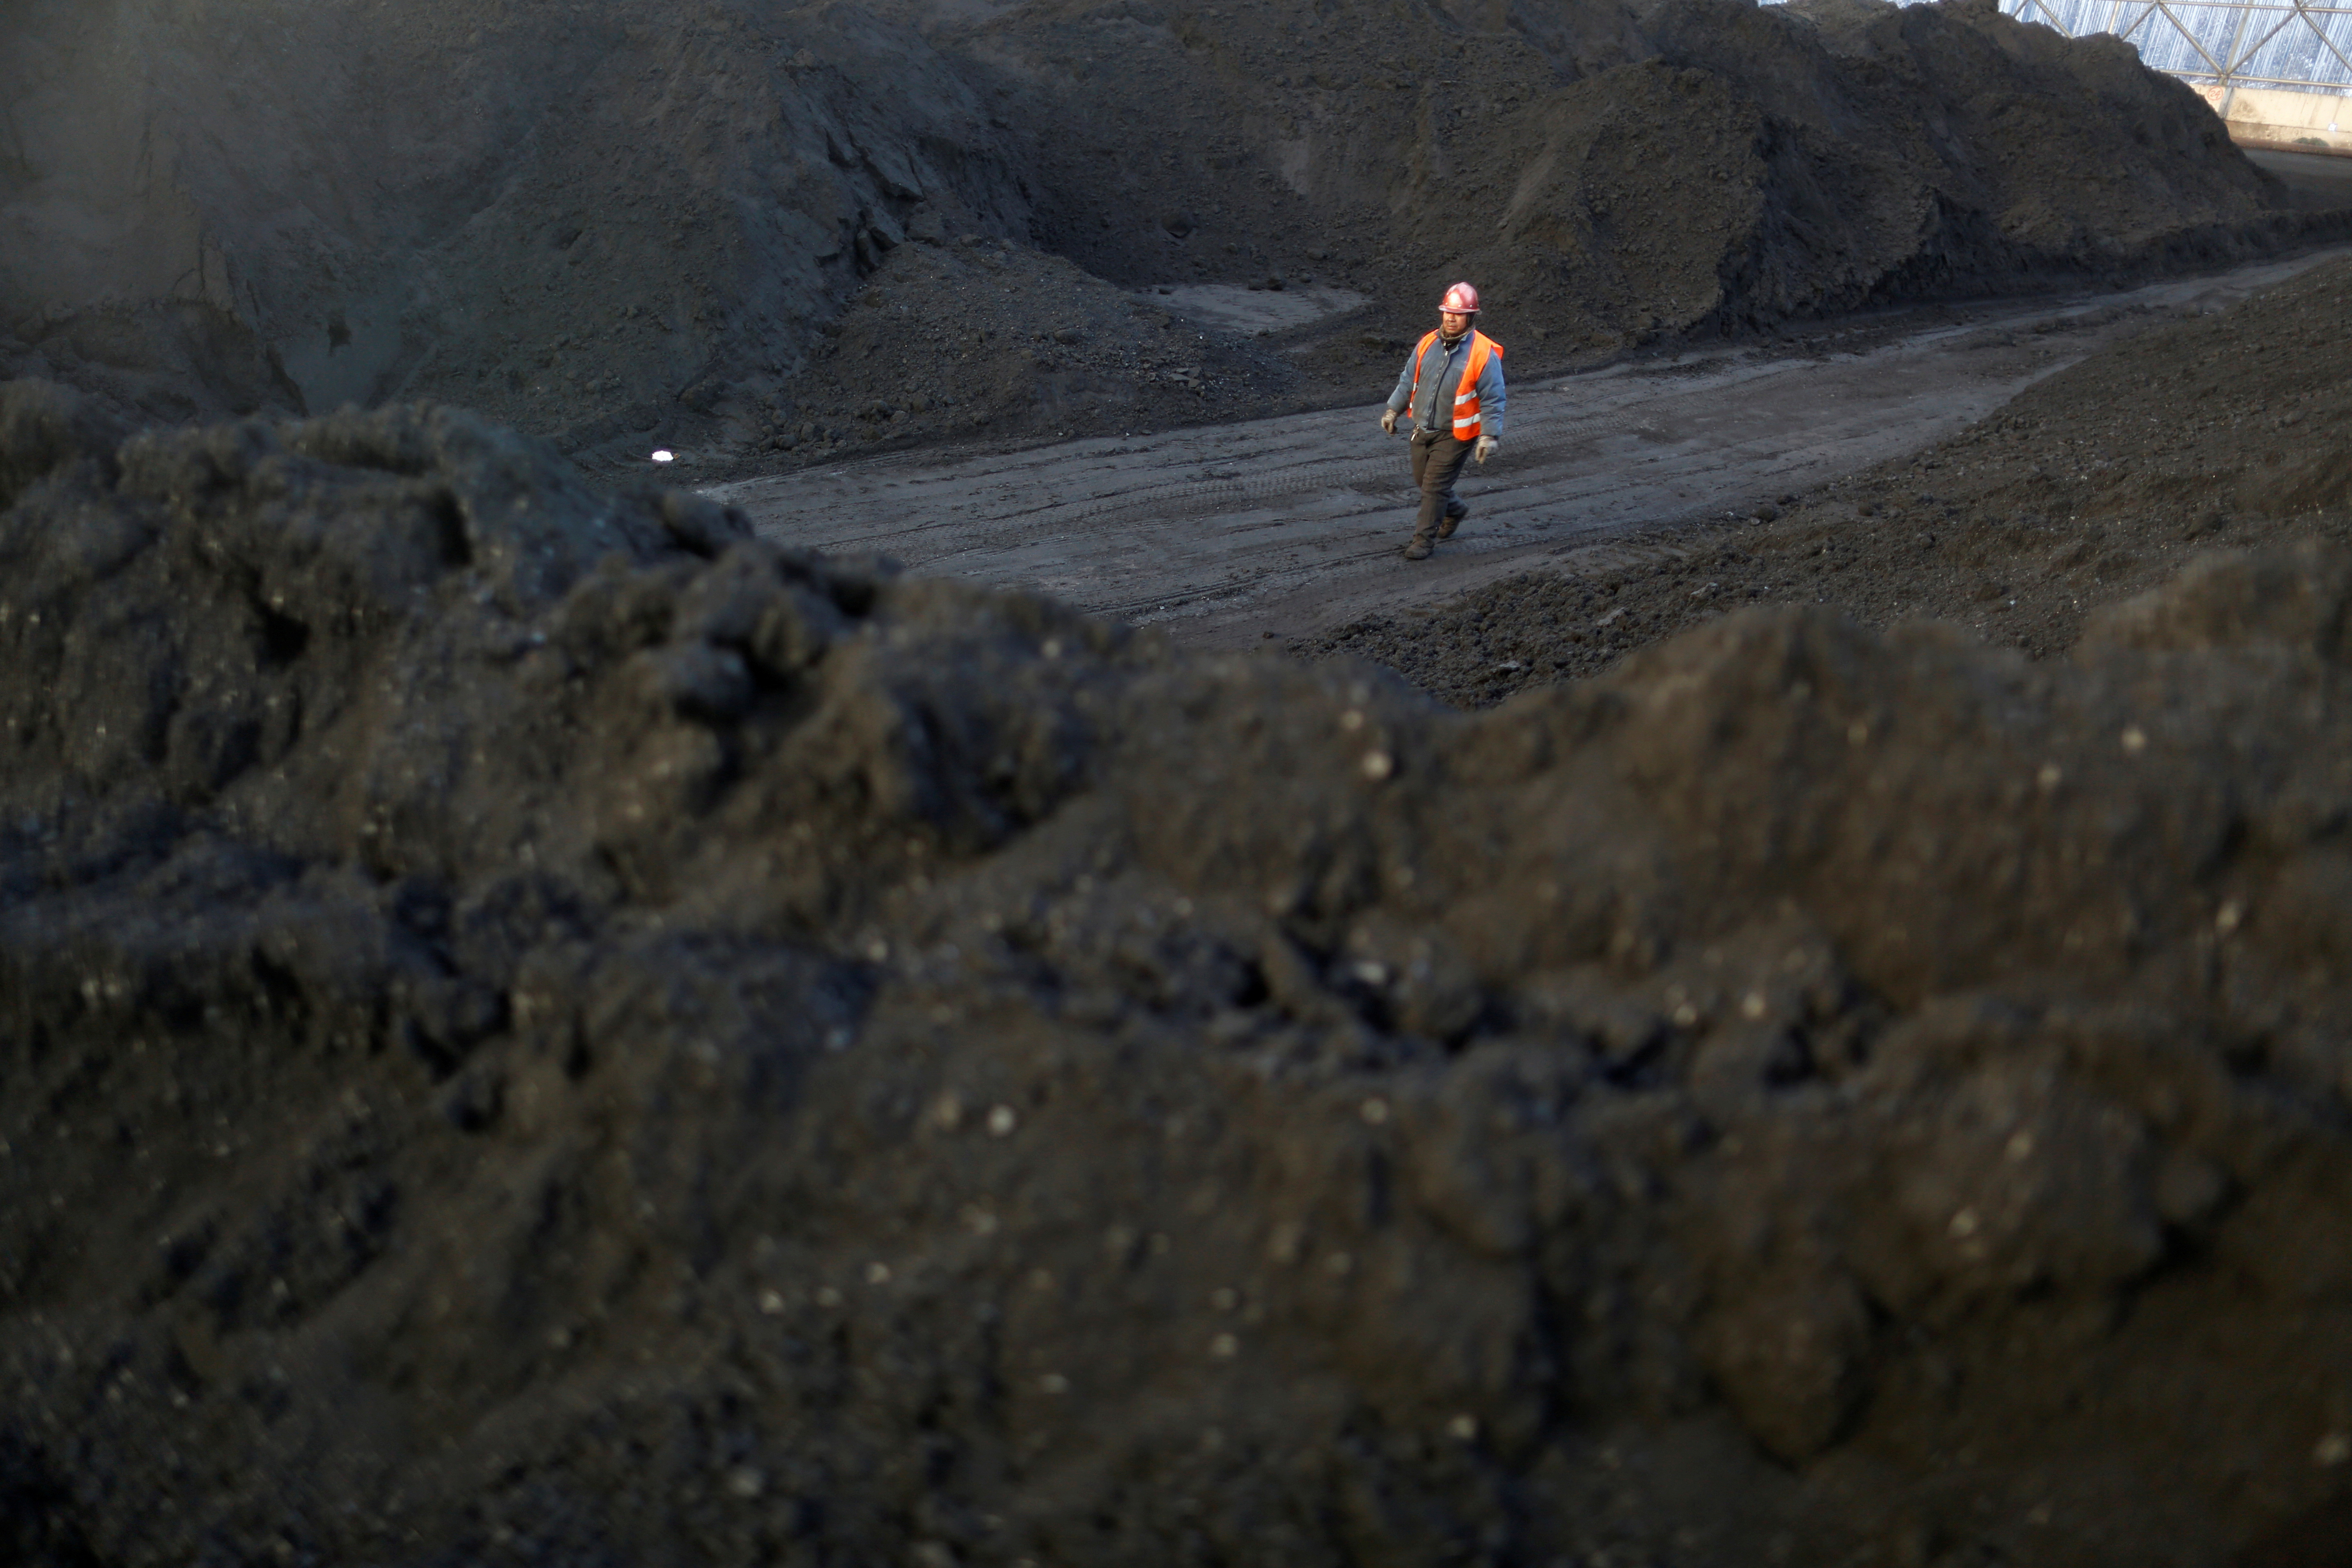 Mining accidents rise in China’s largest coal province as producers increase production